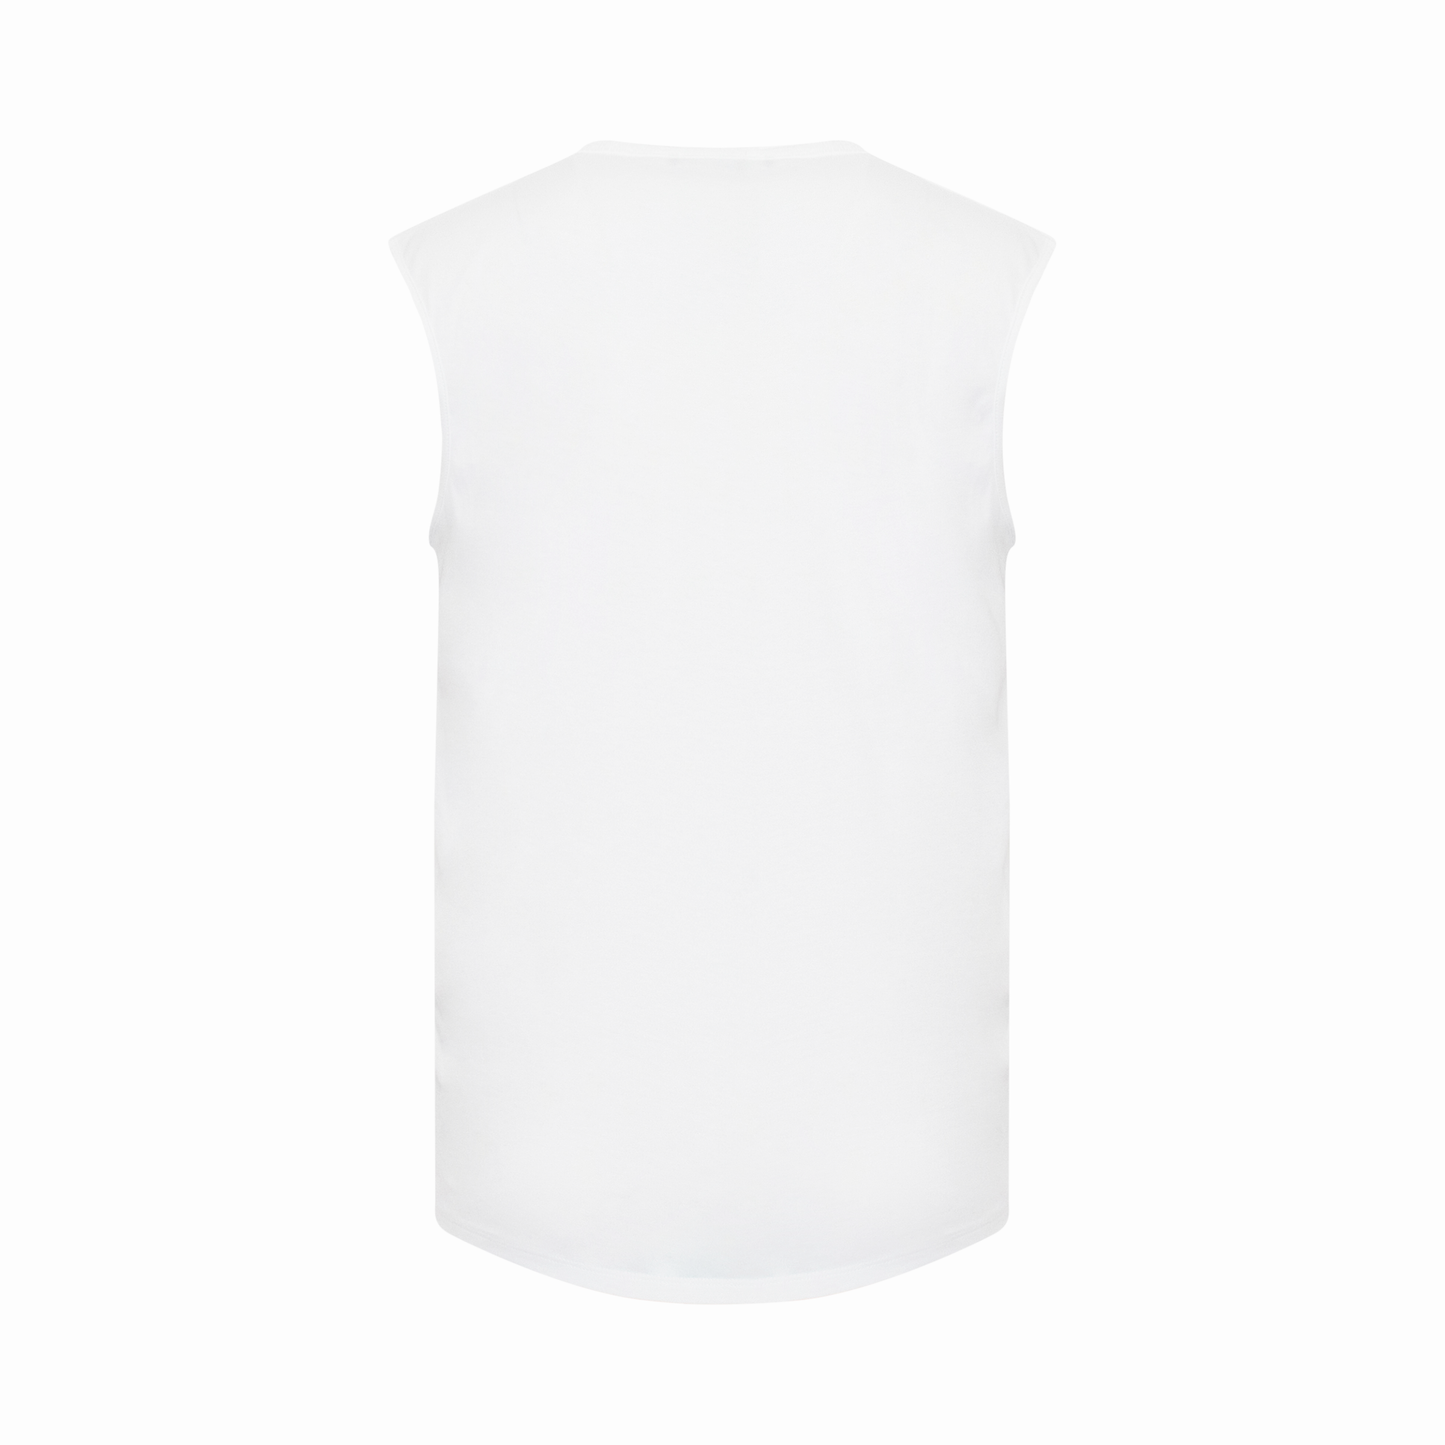 3 Buttons Logo Tank Top in White/Black